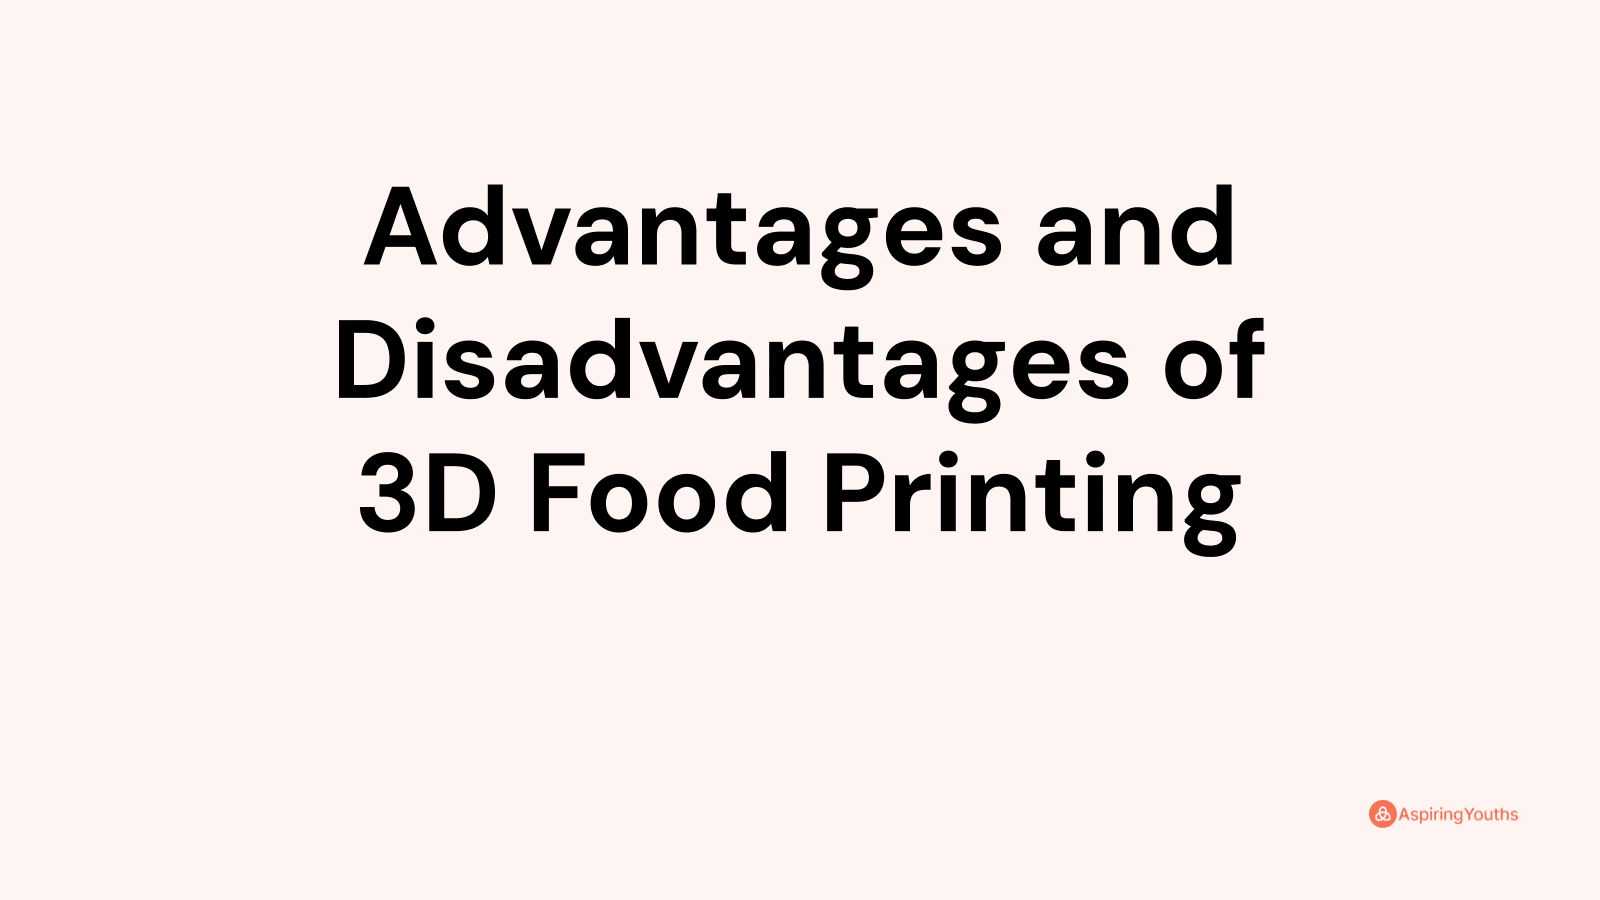 Advantages and disadvantages of 3D Food Printing